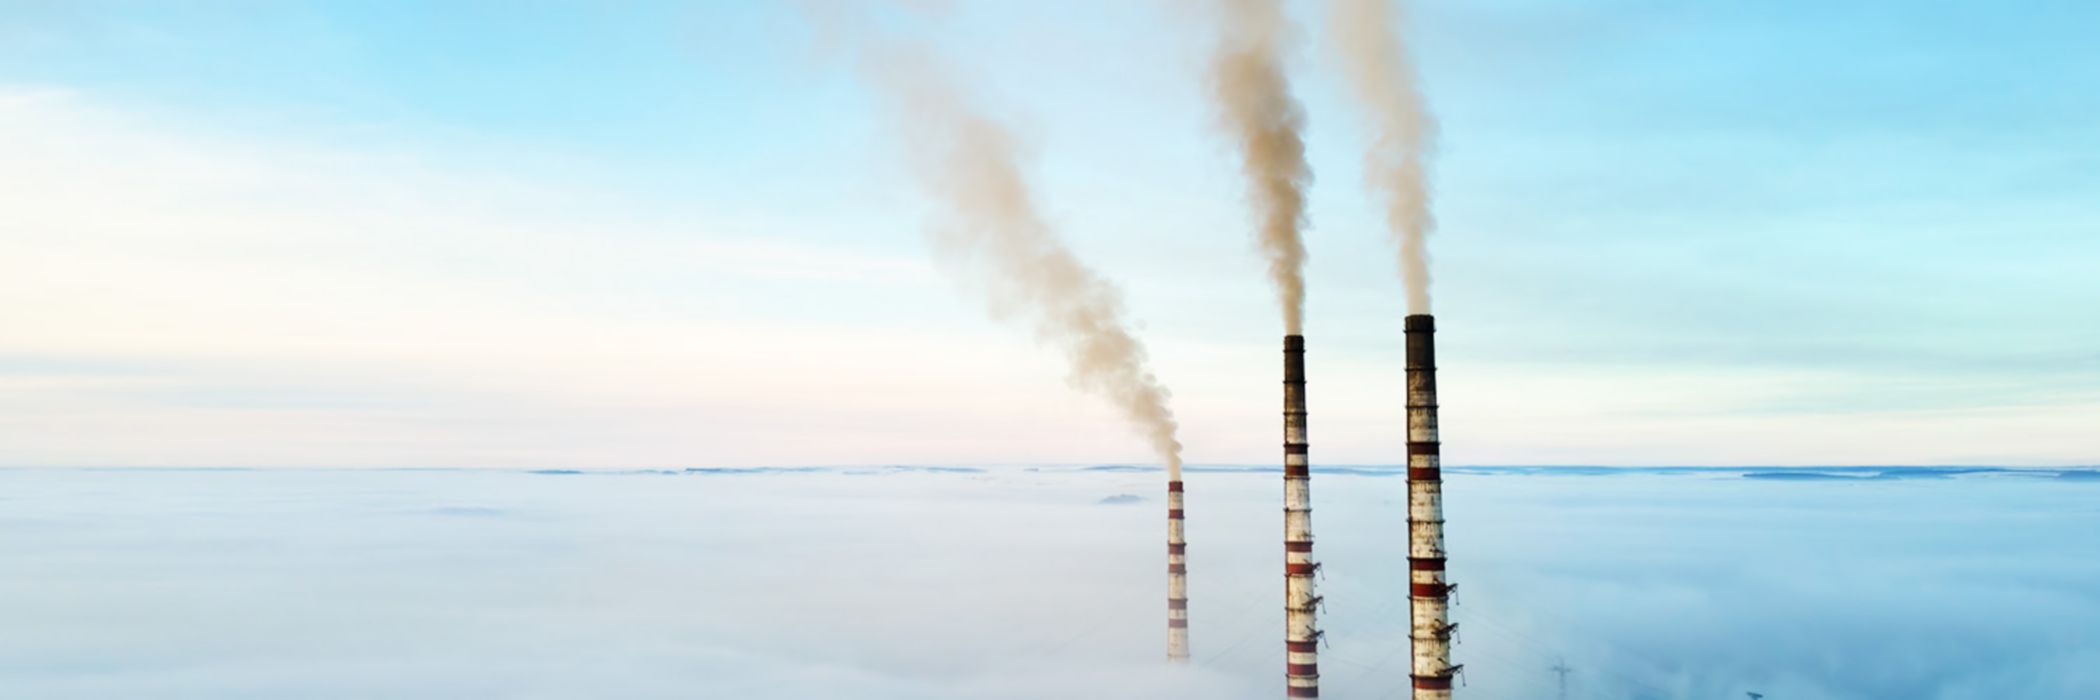 Chimneys above clouds